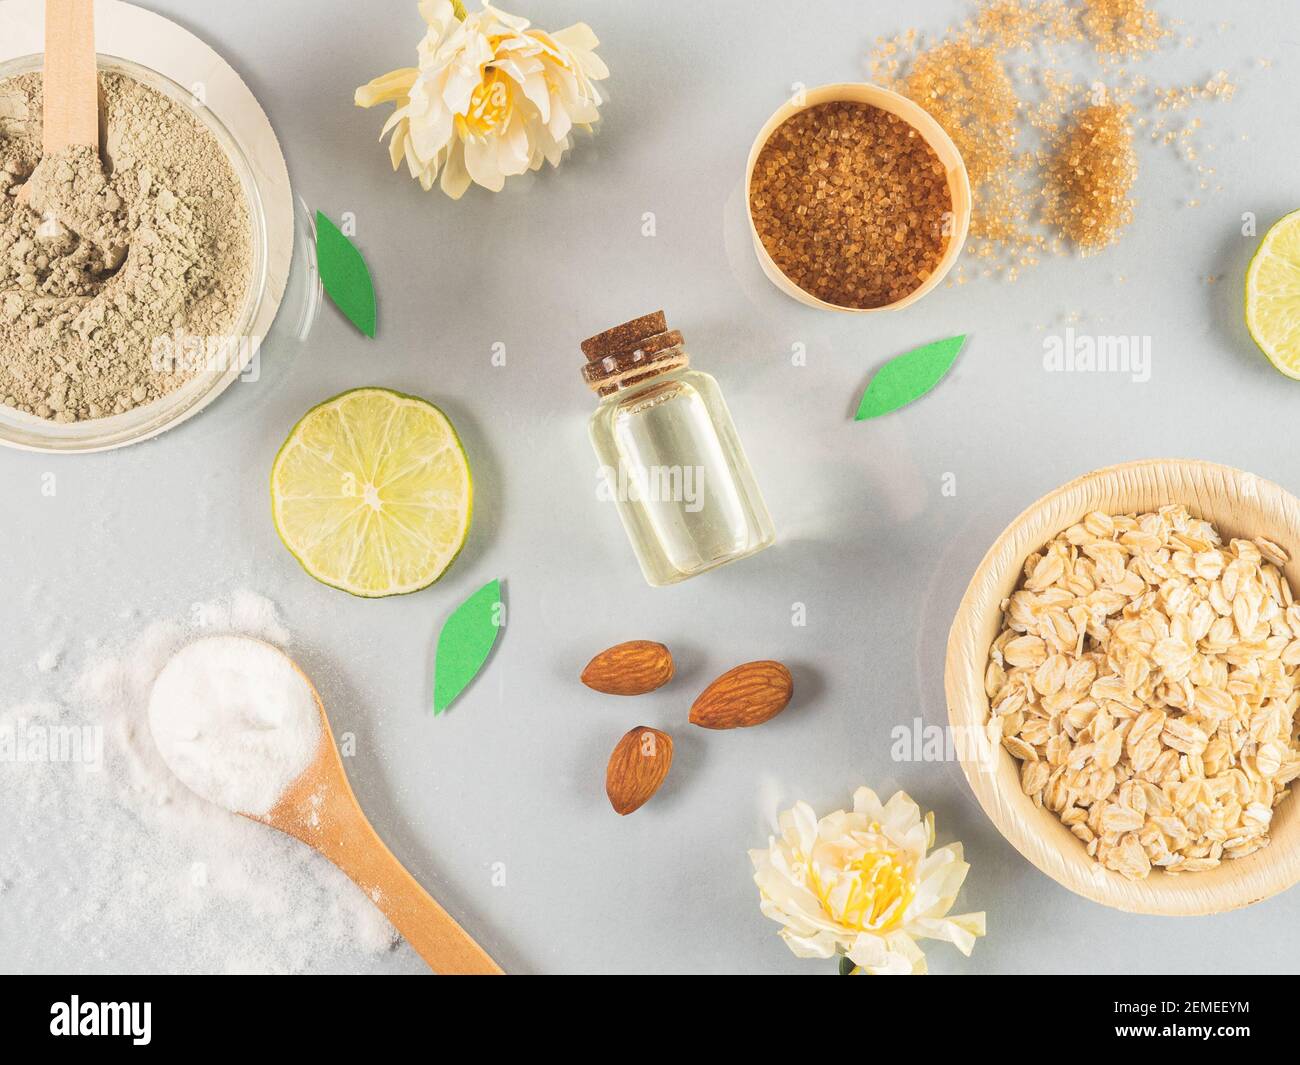 natural skin care products: honey, clay powder, brown sugar, almond oil, oats. Colorful background of natural cosmetics and flowers. natural ingredien Stock Photo